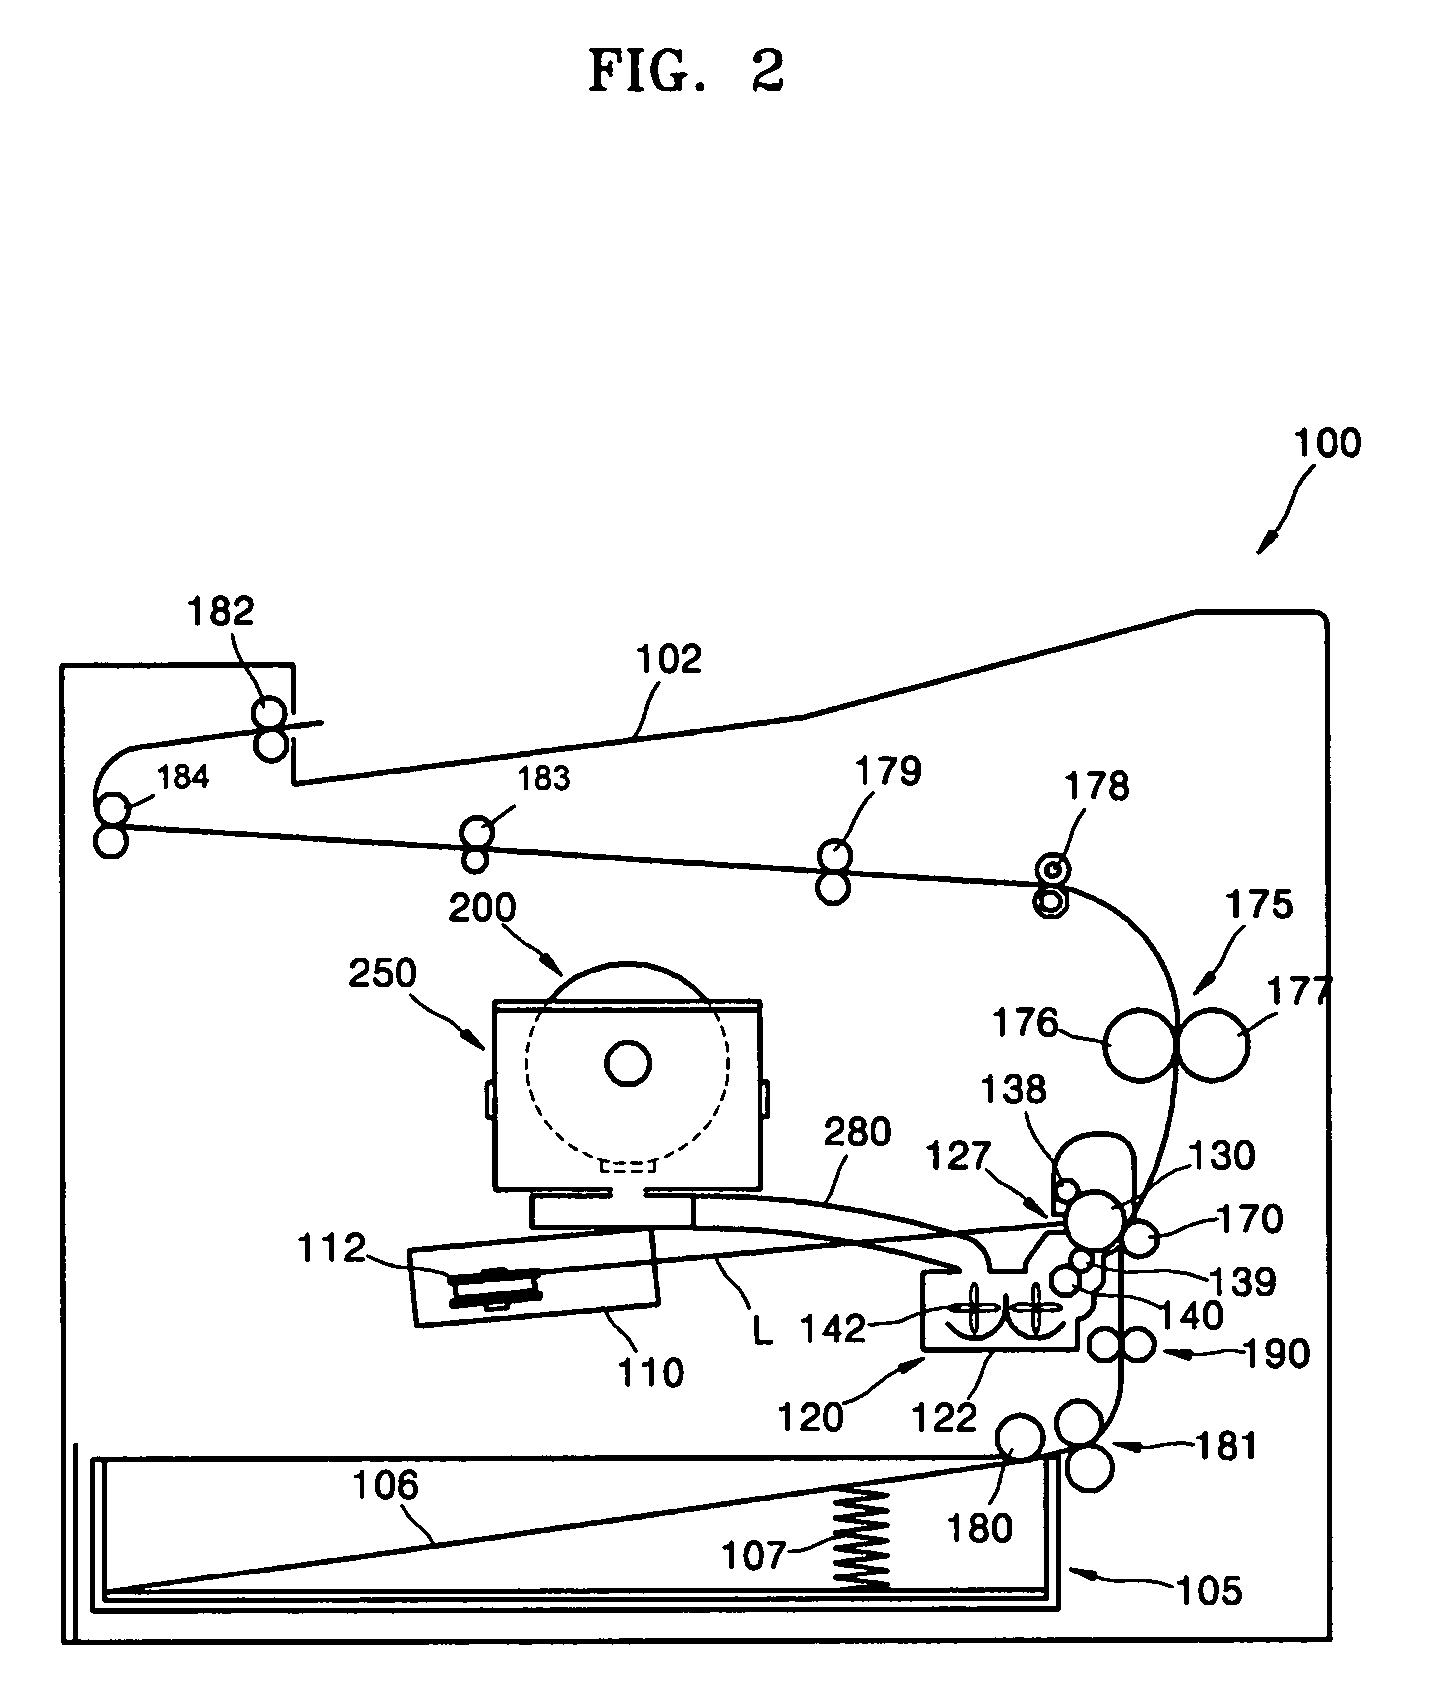 Image forming apparatus having toner remover to remove toner leaked from toner cartridge